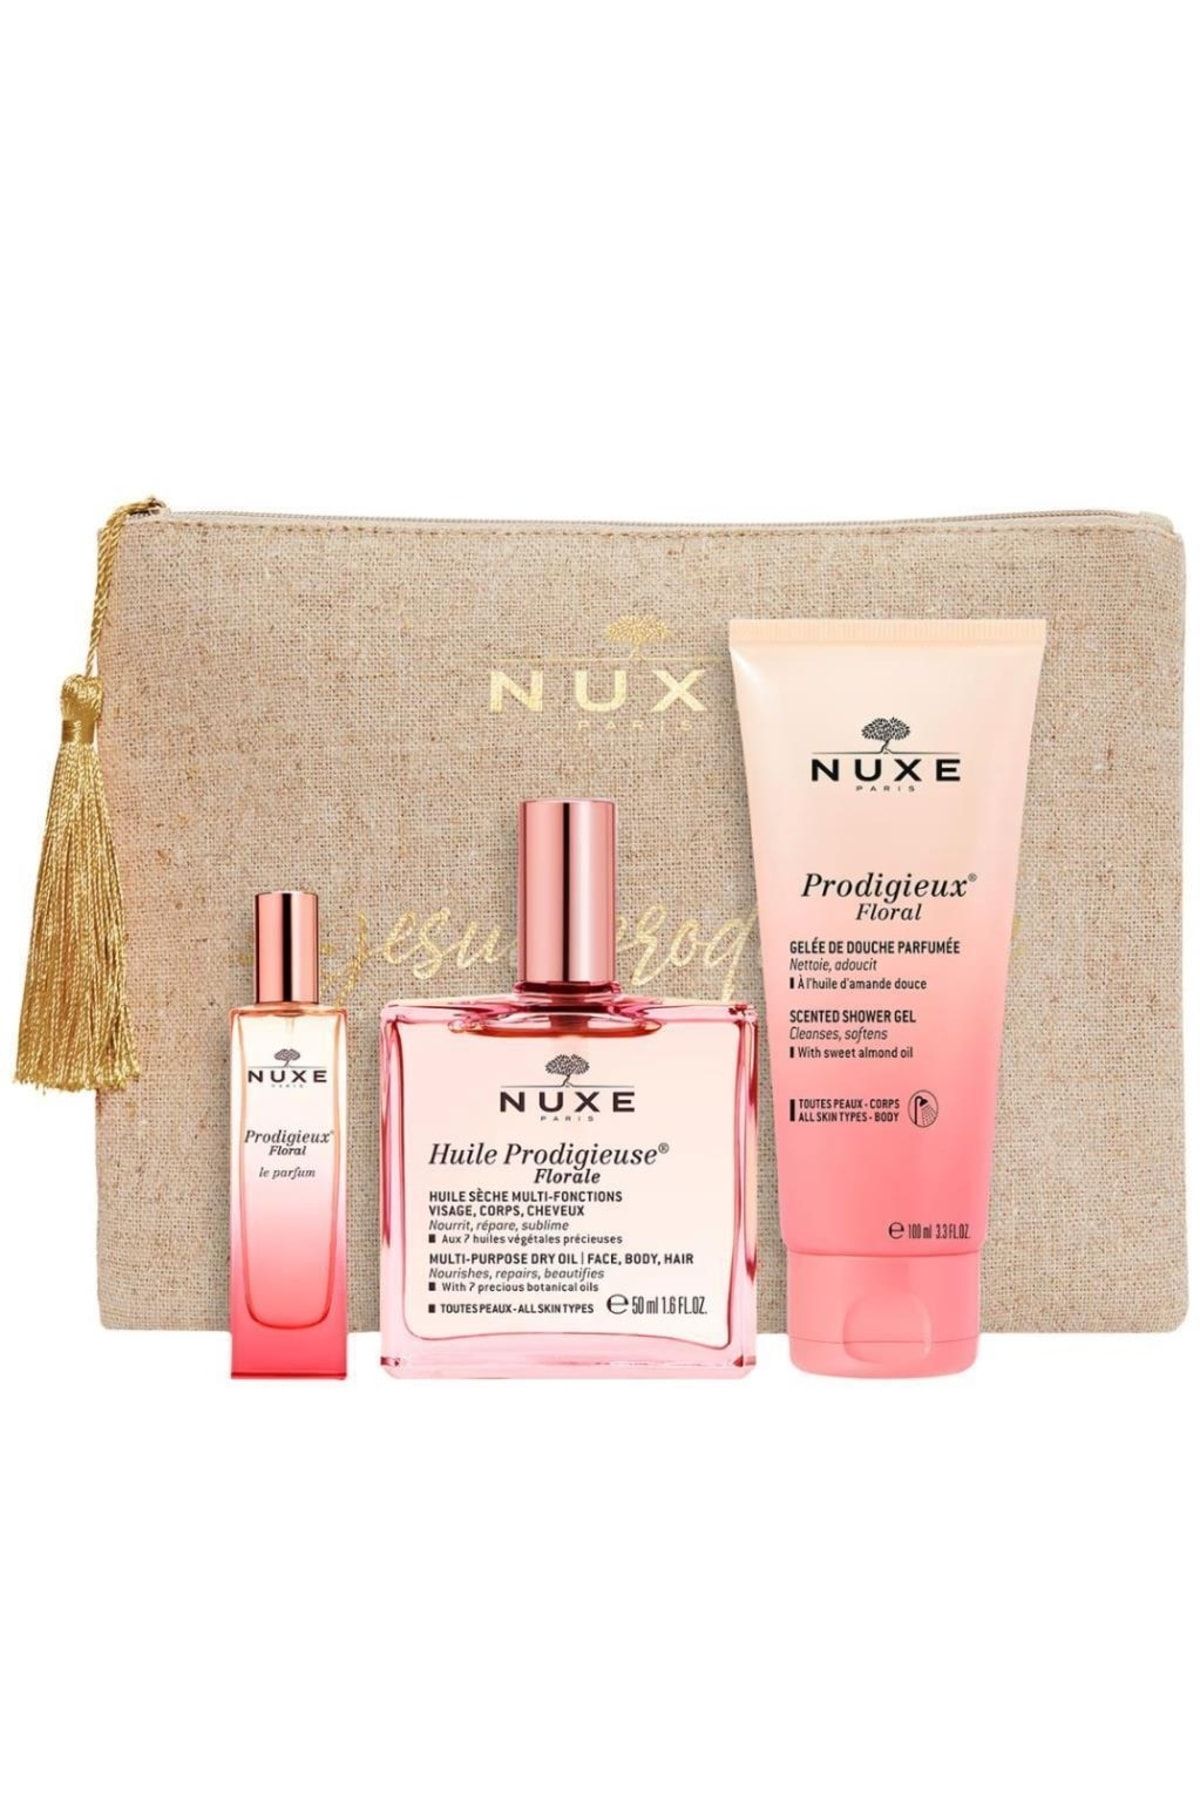 Nuxe My Prodigieux Floral Beauty Essentials